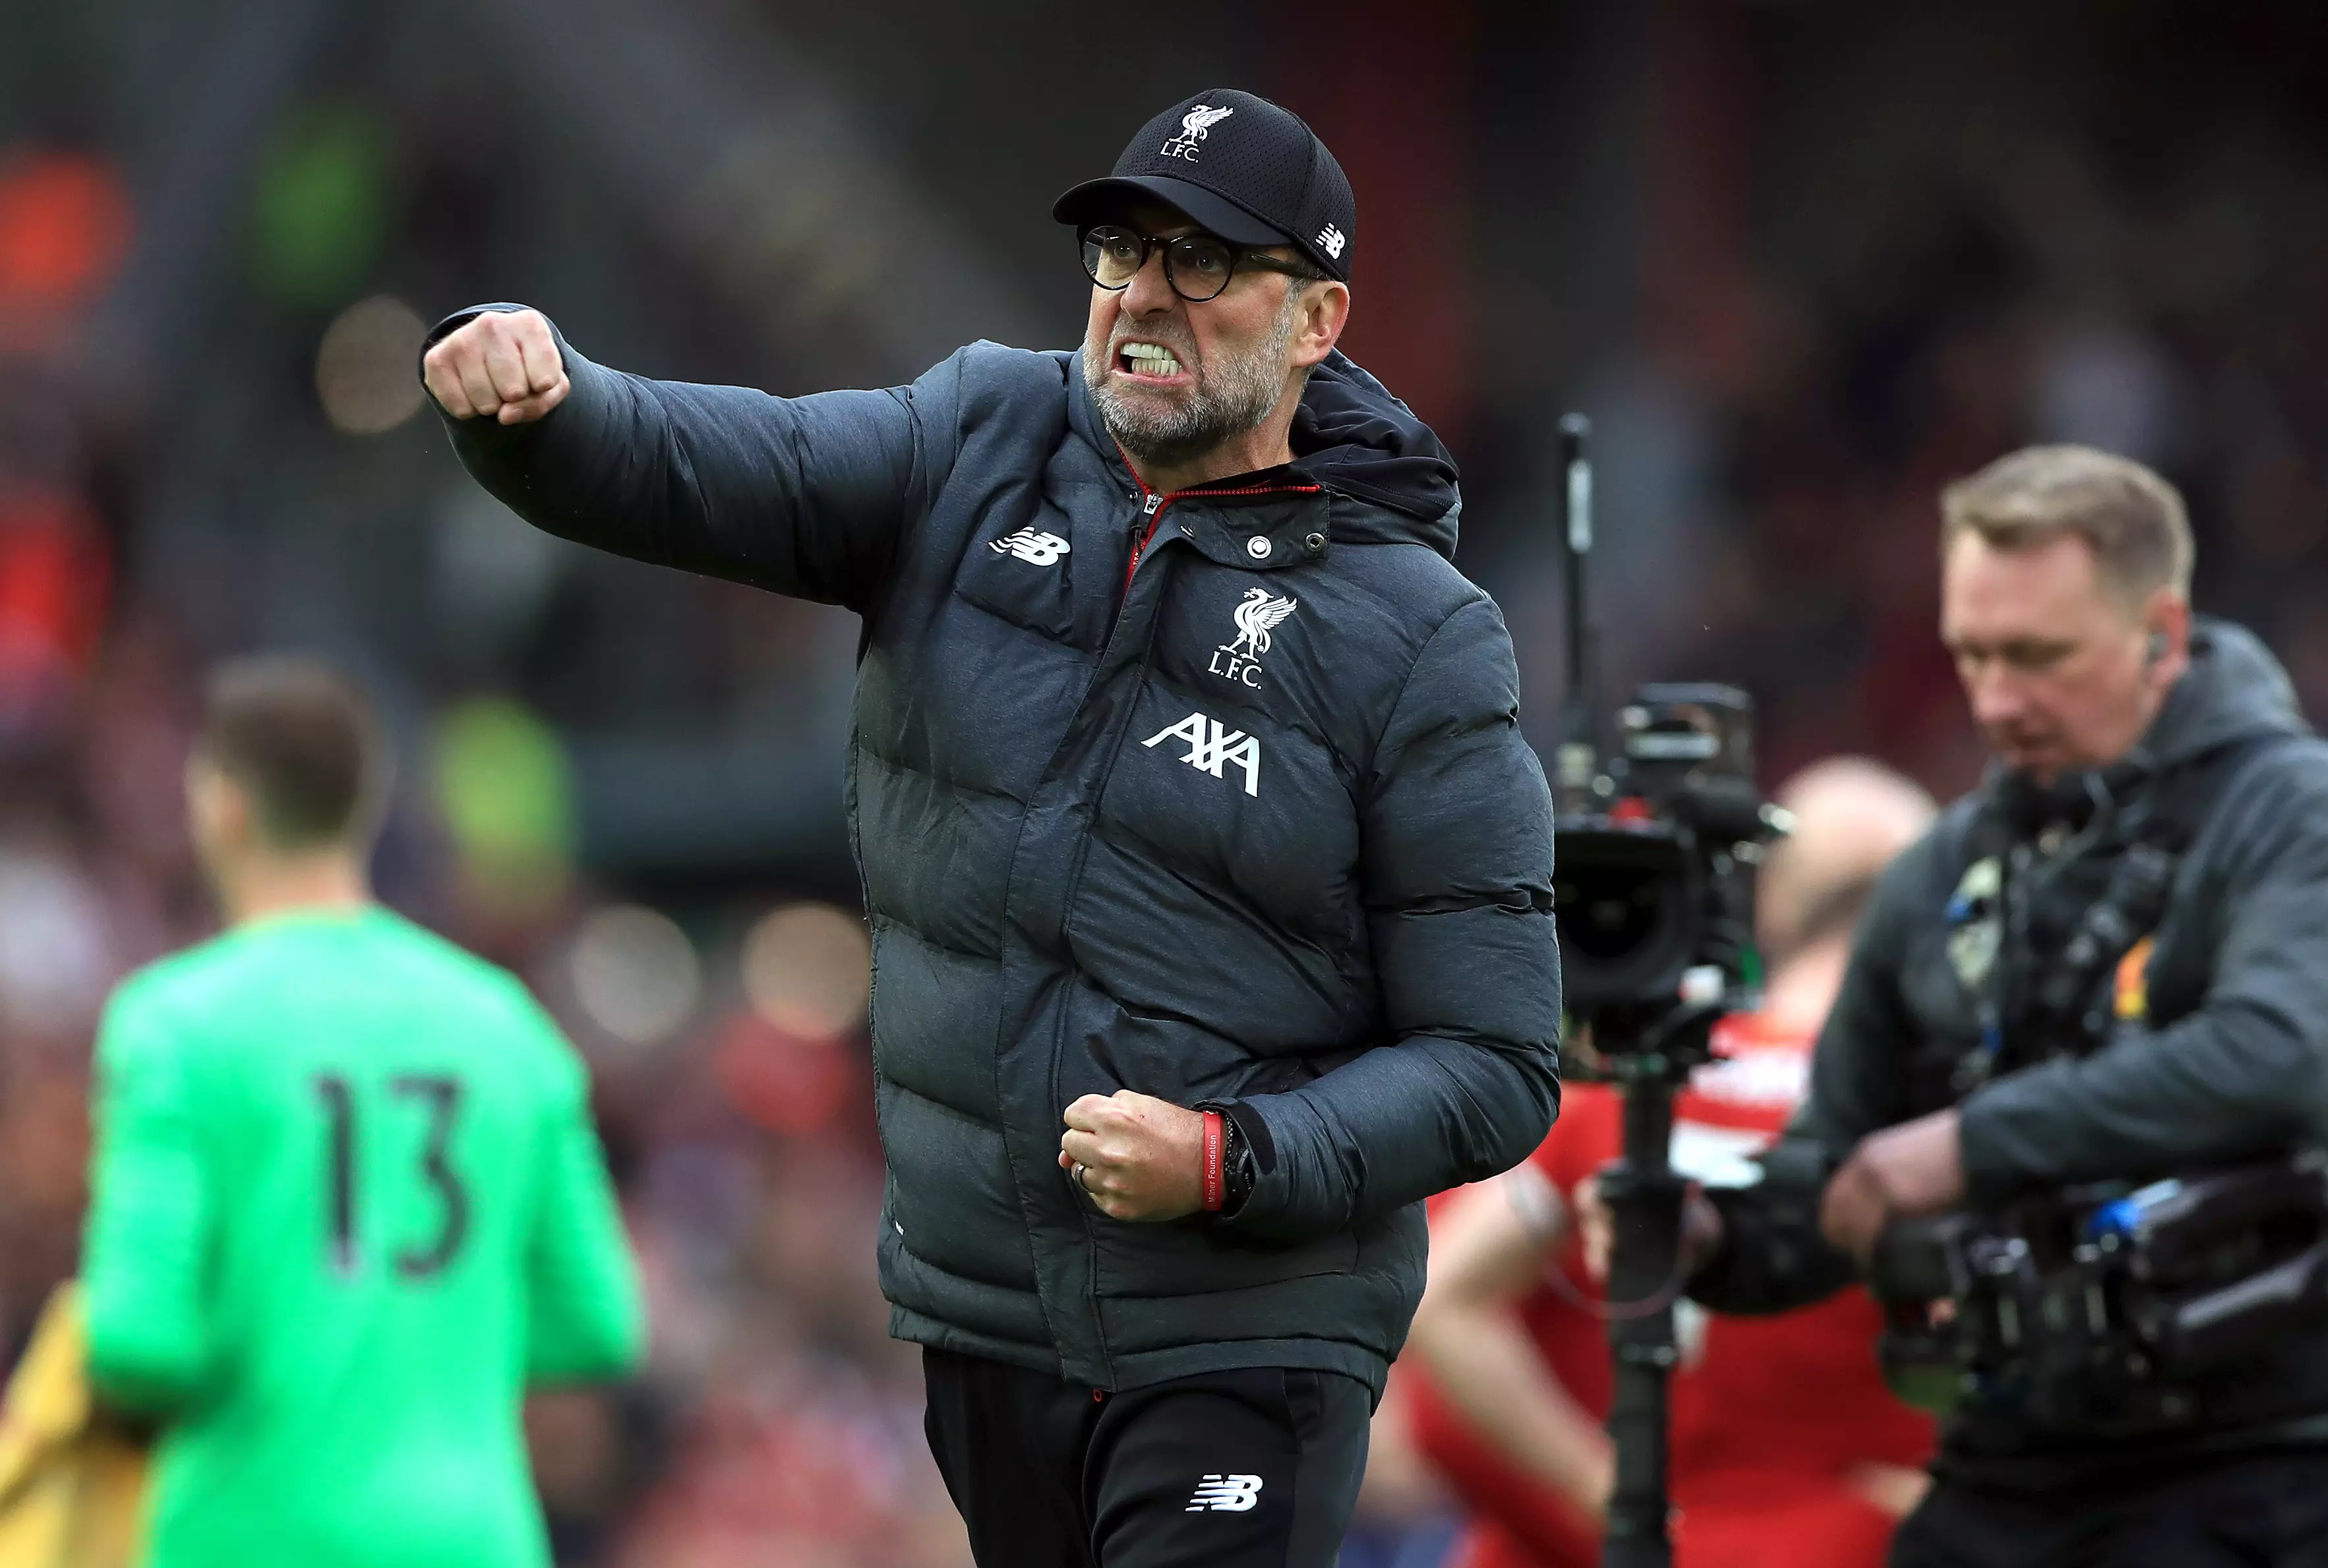 Klopp is likely to be celebrating at the end of the season. Image: PA Images